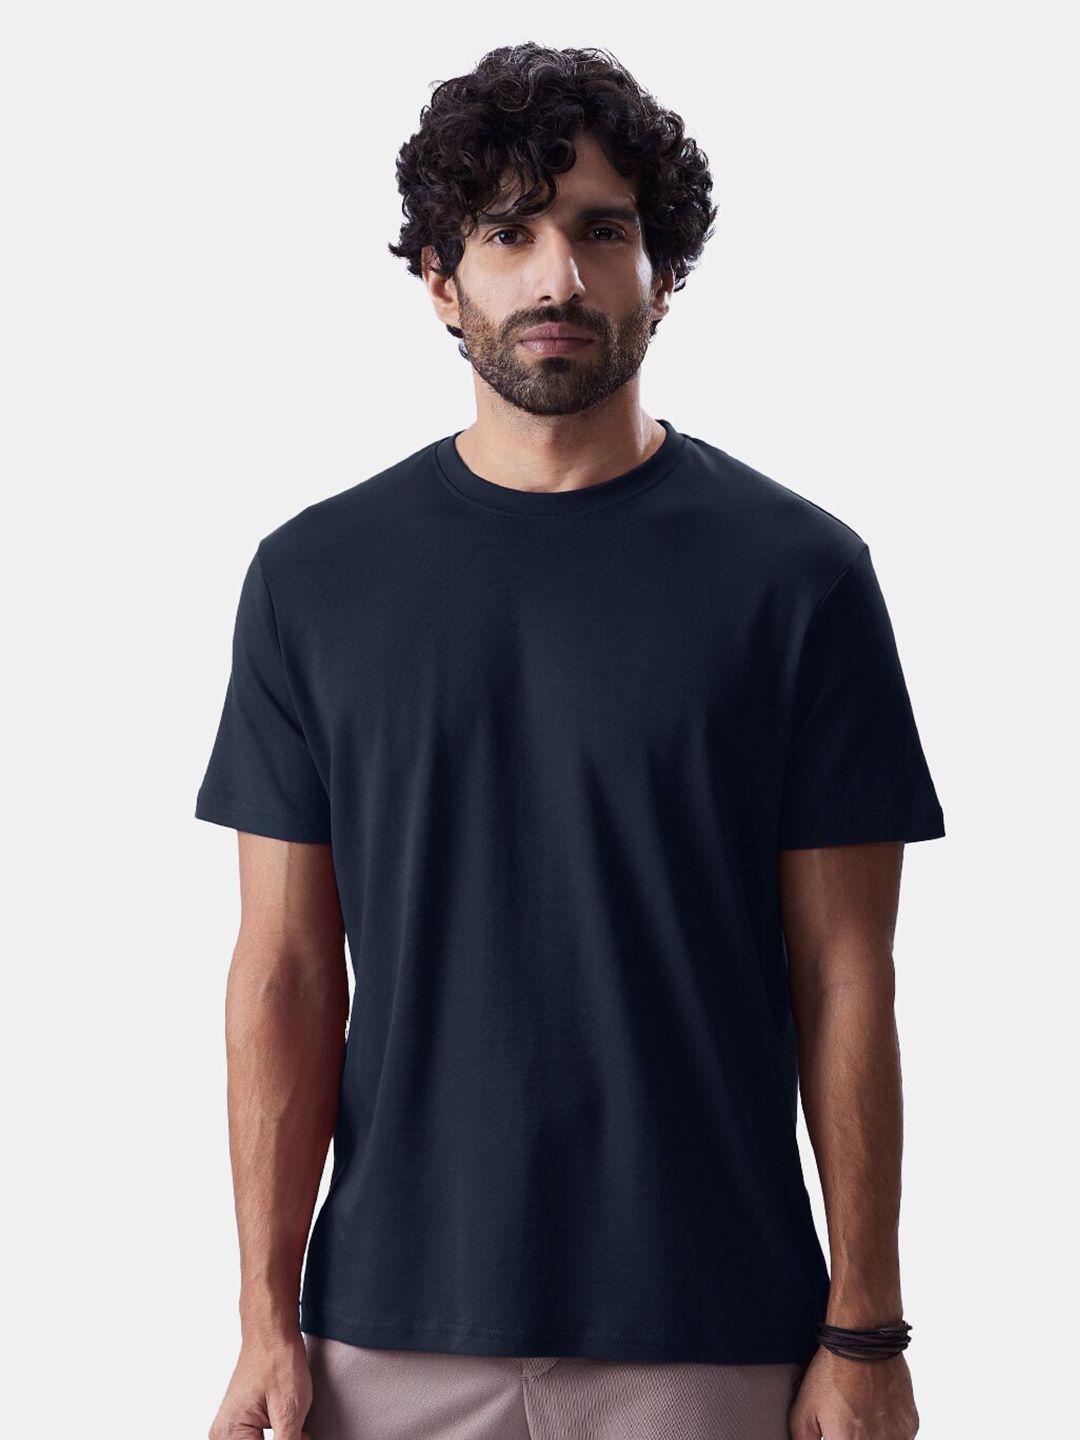 the souled store navy blue round neck cotton t-shirt